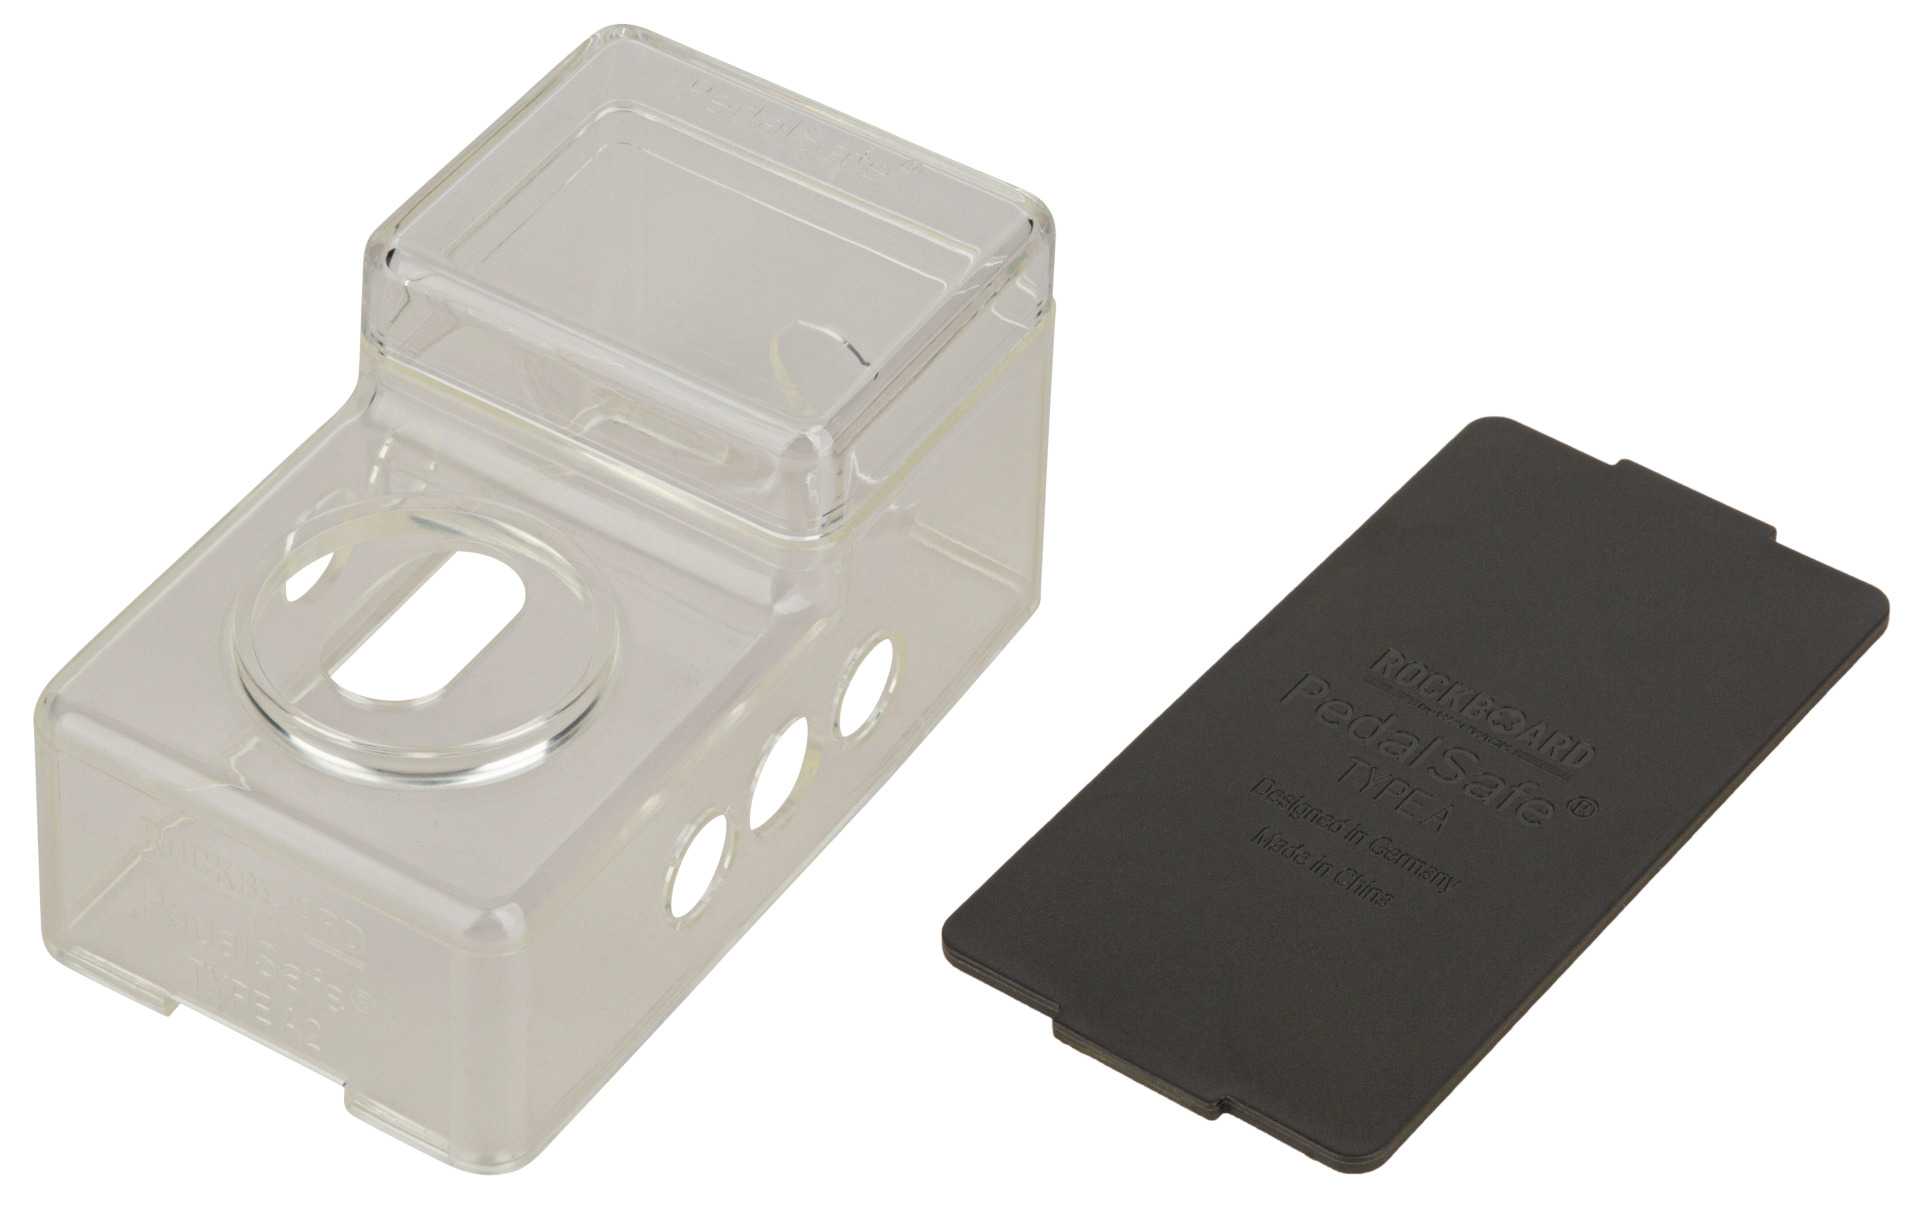 RockBoard PedalSafe Type A2 - Protective Cover And Universal Mounting Plate For Standard Single Pedals